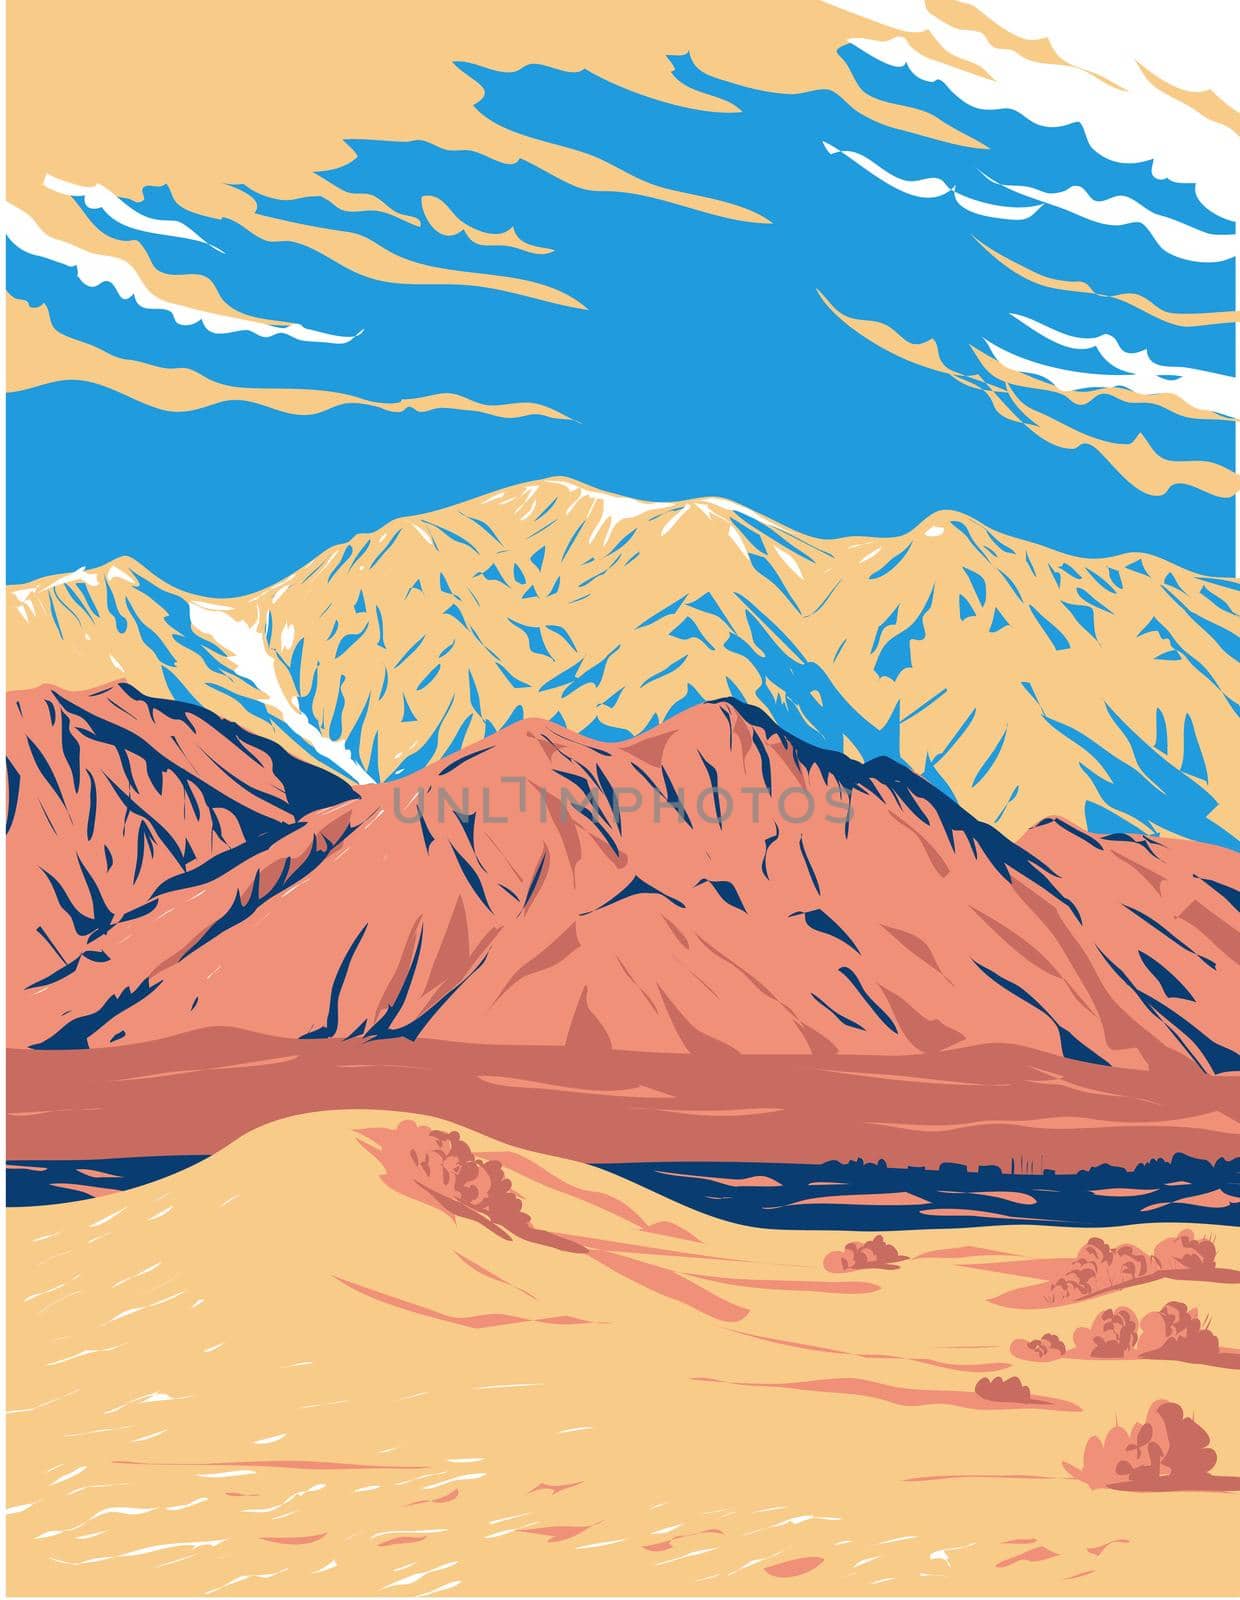 WPA poster art of Olancha Peak on the Tulare-Inyo county line in the South Sierra Wilderness located in Sierra Nevada of California, United States USA done in works project administration style.
